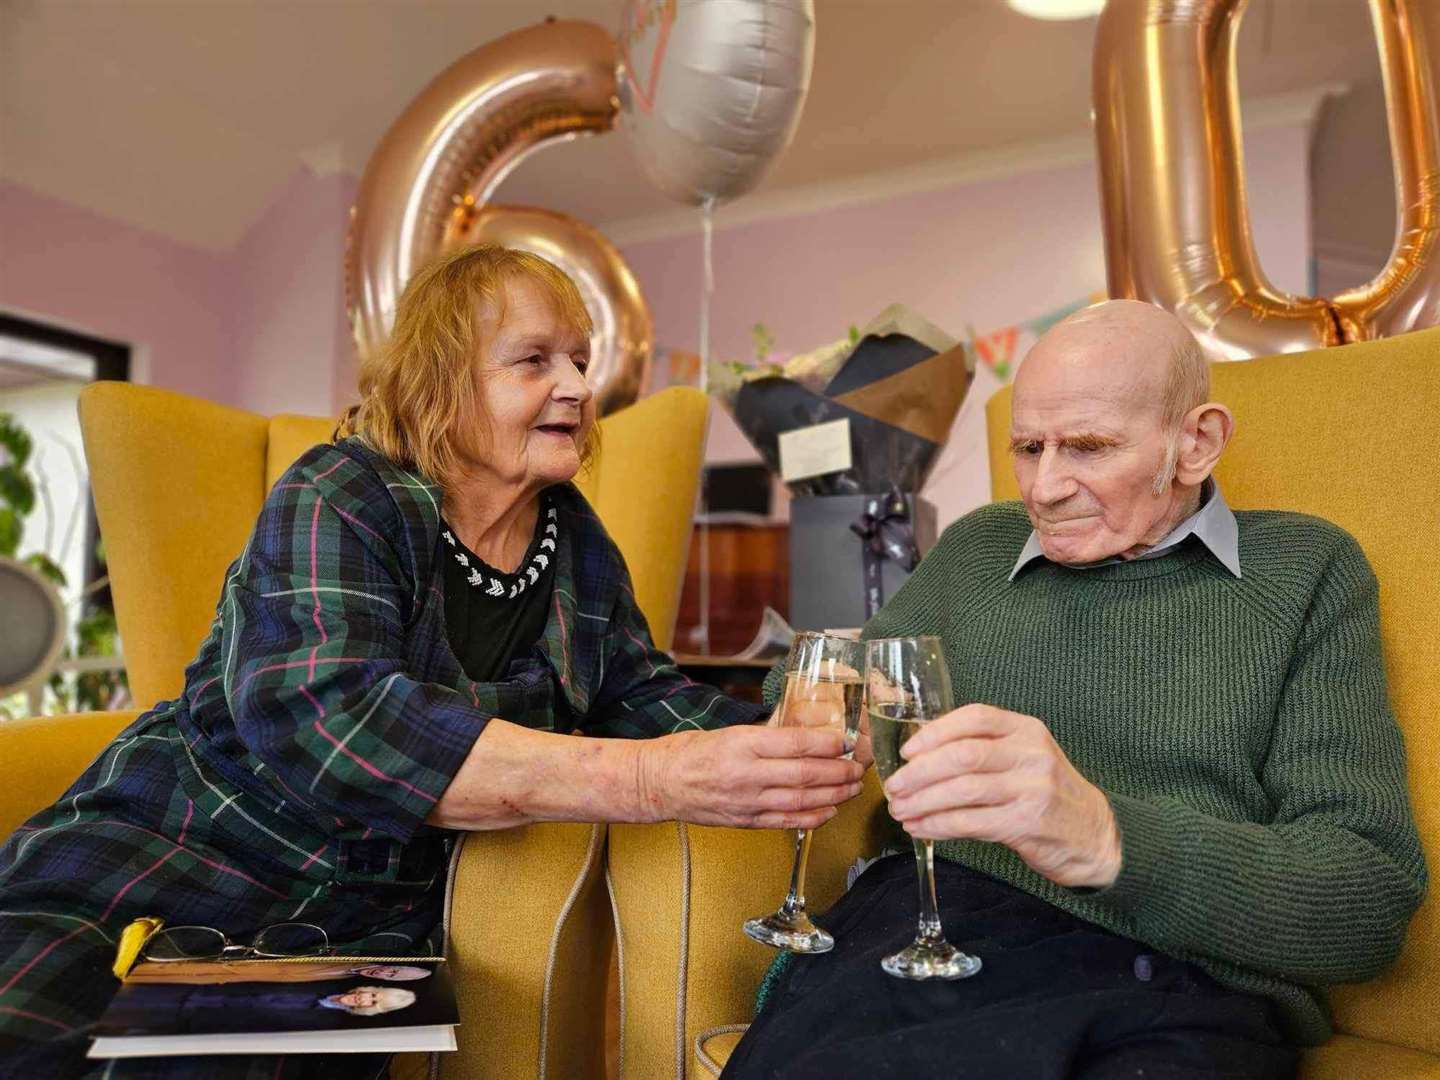 The couple celebrated their 60th anniversary with a glass of wine before Billy serenaded his wife with a song.